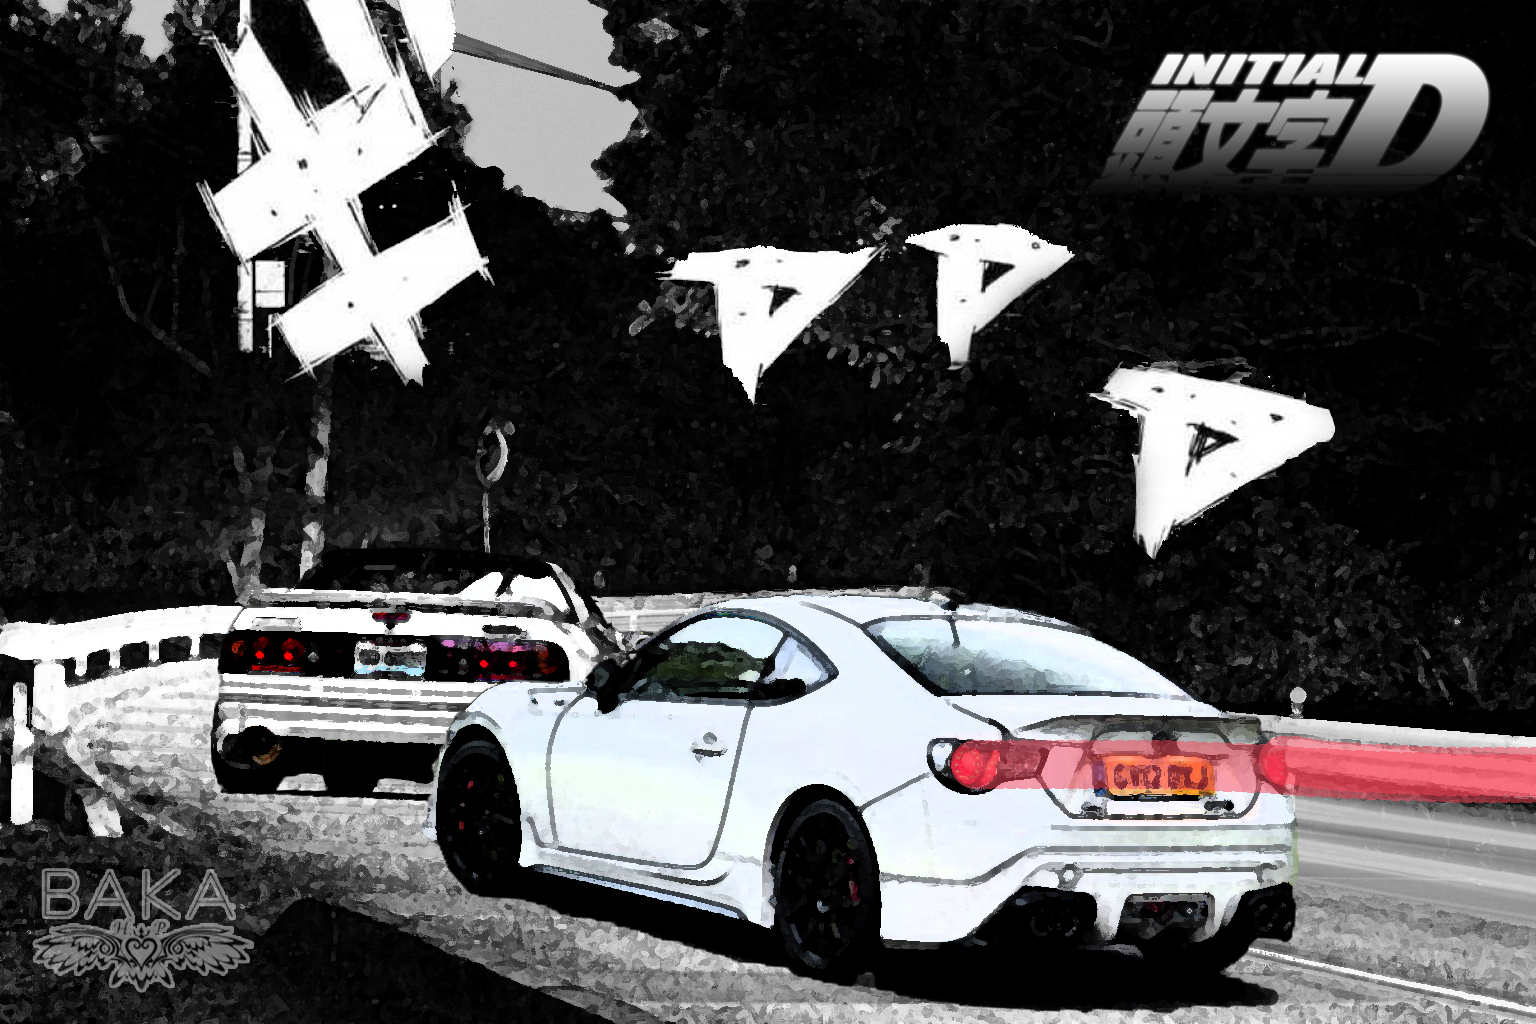 Free Download Initial D Ae86 Wallpaper Initial D Fc Vs Gt86 By 1536x1024 For Your Desktop Mobile Tablet Explore 73 Wallpaper Initial D Initial D Wallpaper Hd Initial Wallpaper